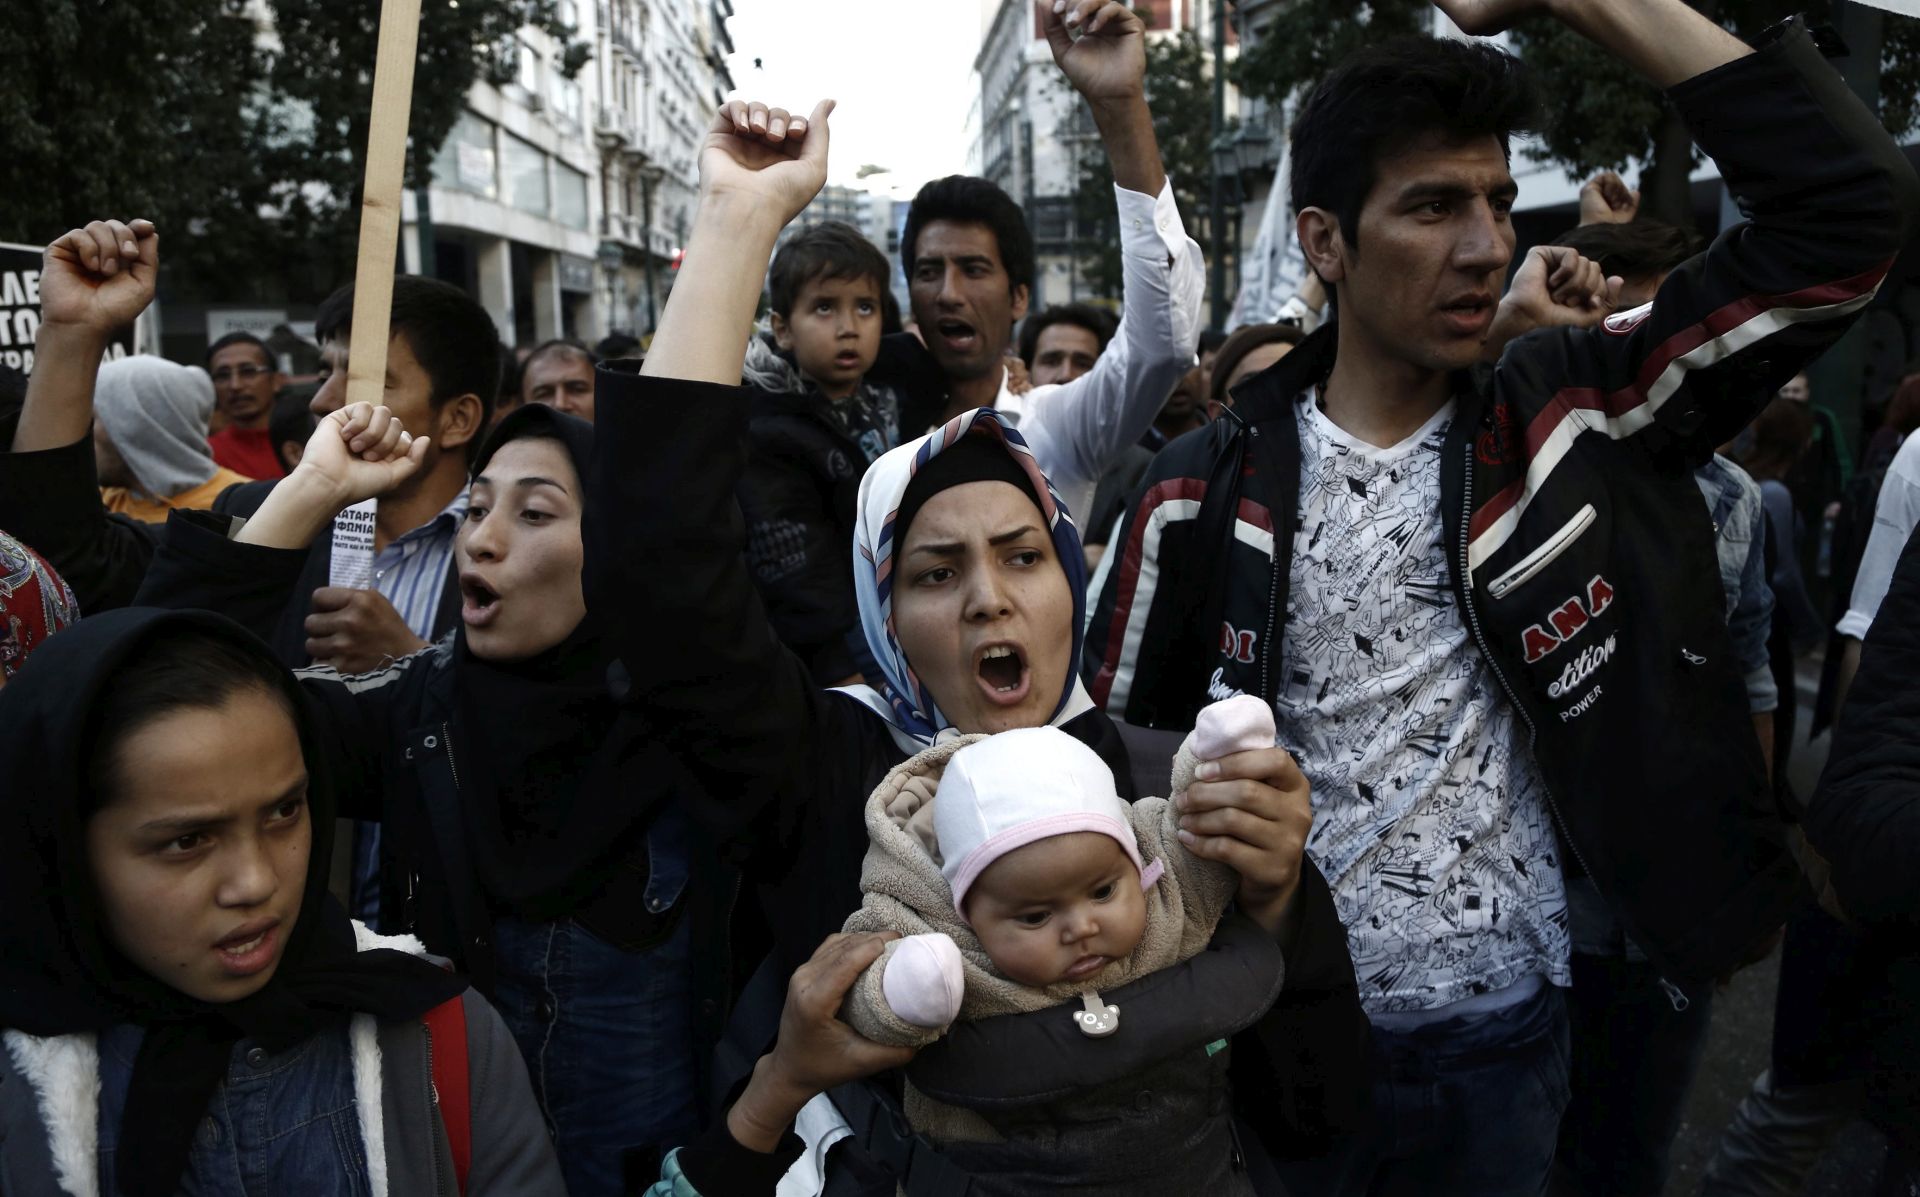 epa05236722 Refugees and migrants who are trapped in Greece shout slogans as they take part in a protest demanding the opening of the borders between Greece and Former Yugoslav Republic of Macedonia (FYROM) in Athens, Greece, 30 March 2016. Migration restrictions along the so-called Balkan route, the main path for migrants and refugees from the Middle East into the European Union, has left thousands of migrants trapped in Greece.  EPA/YANNIS KOLESIDIS